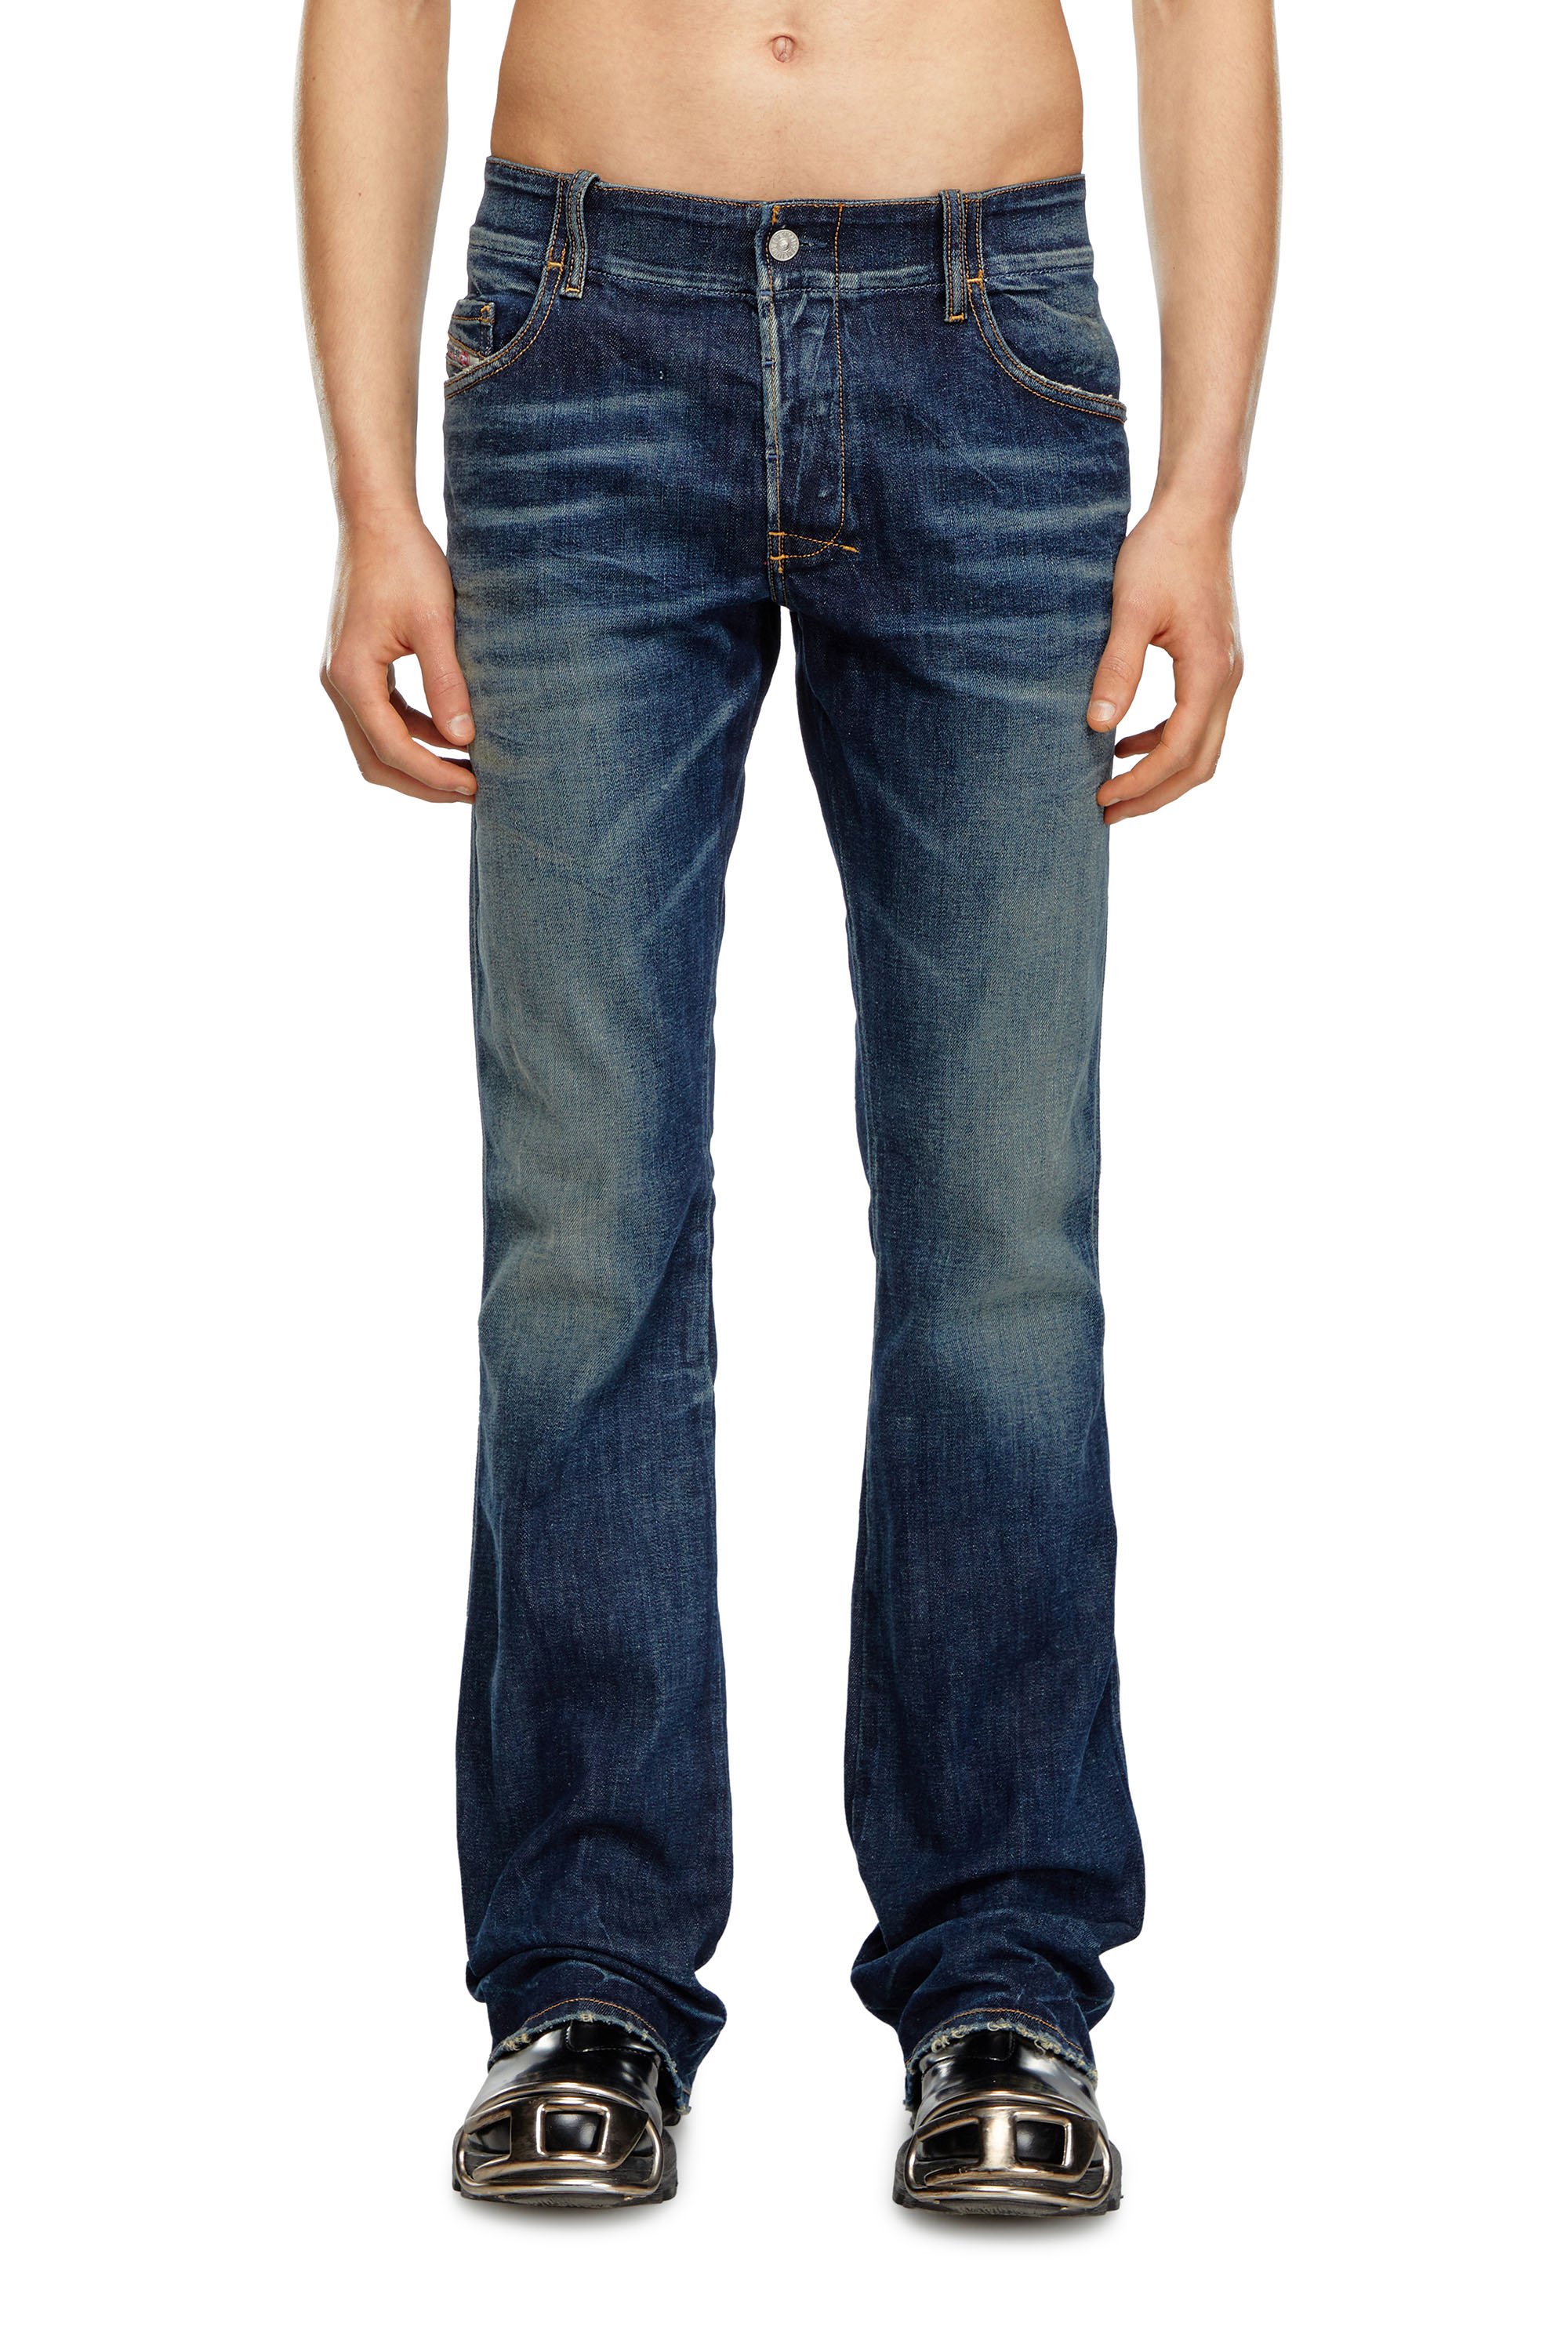 Men's Bootcut Jeans: Flare, Relaxed, Wide, low-rise